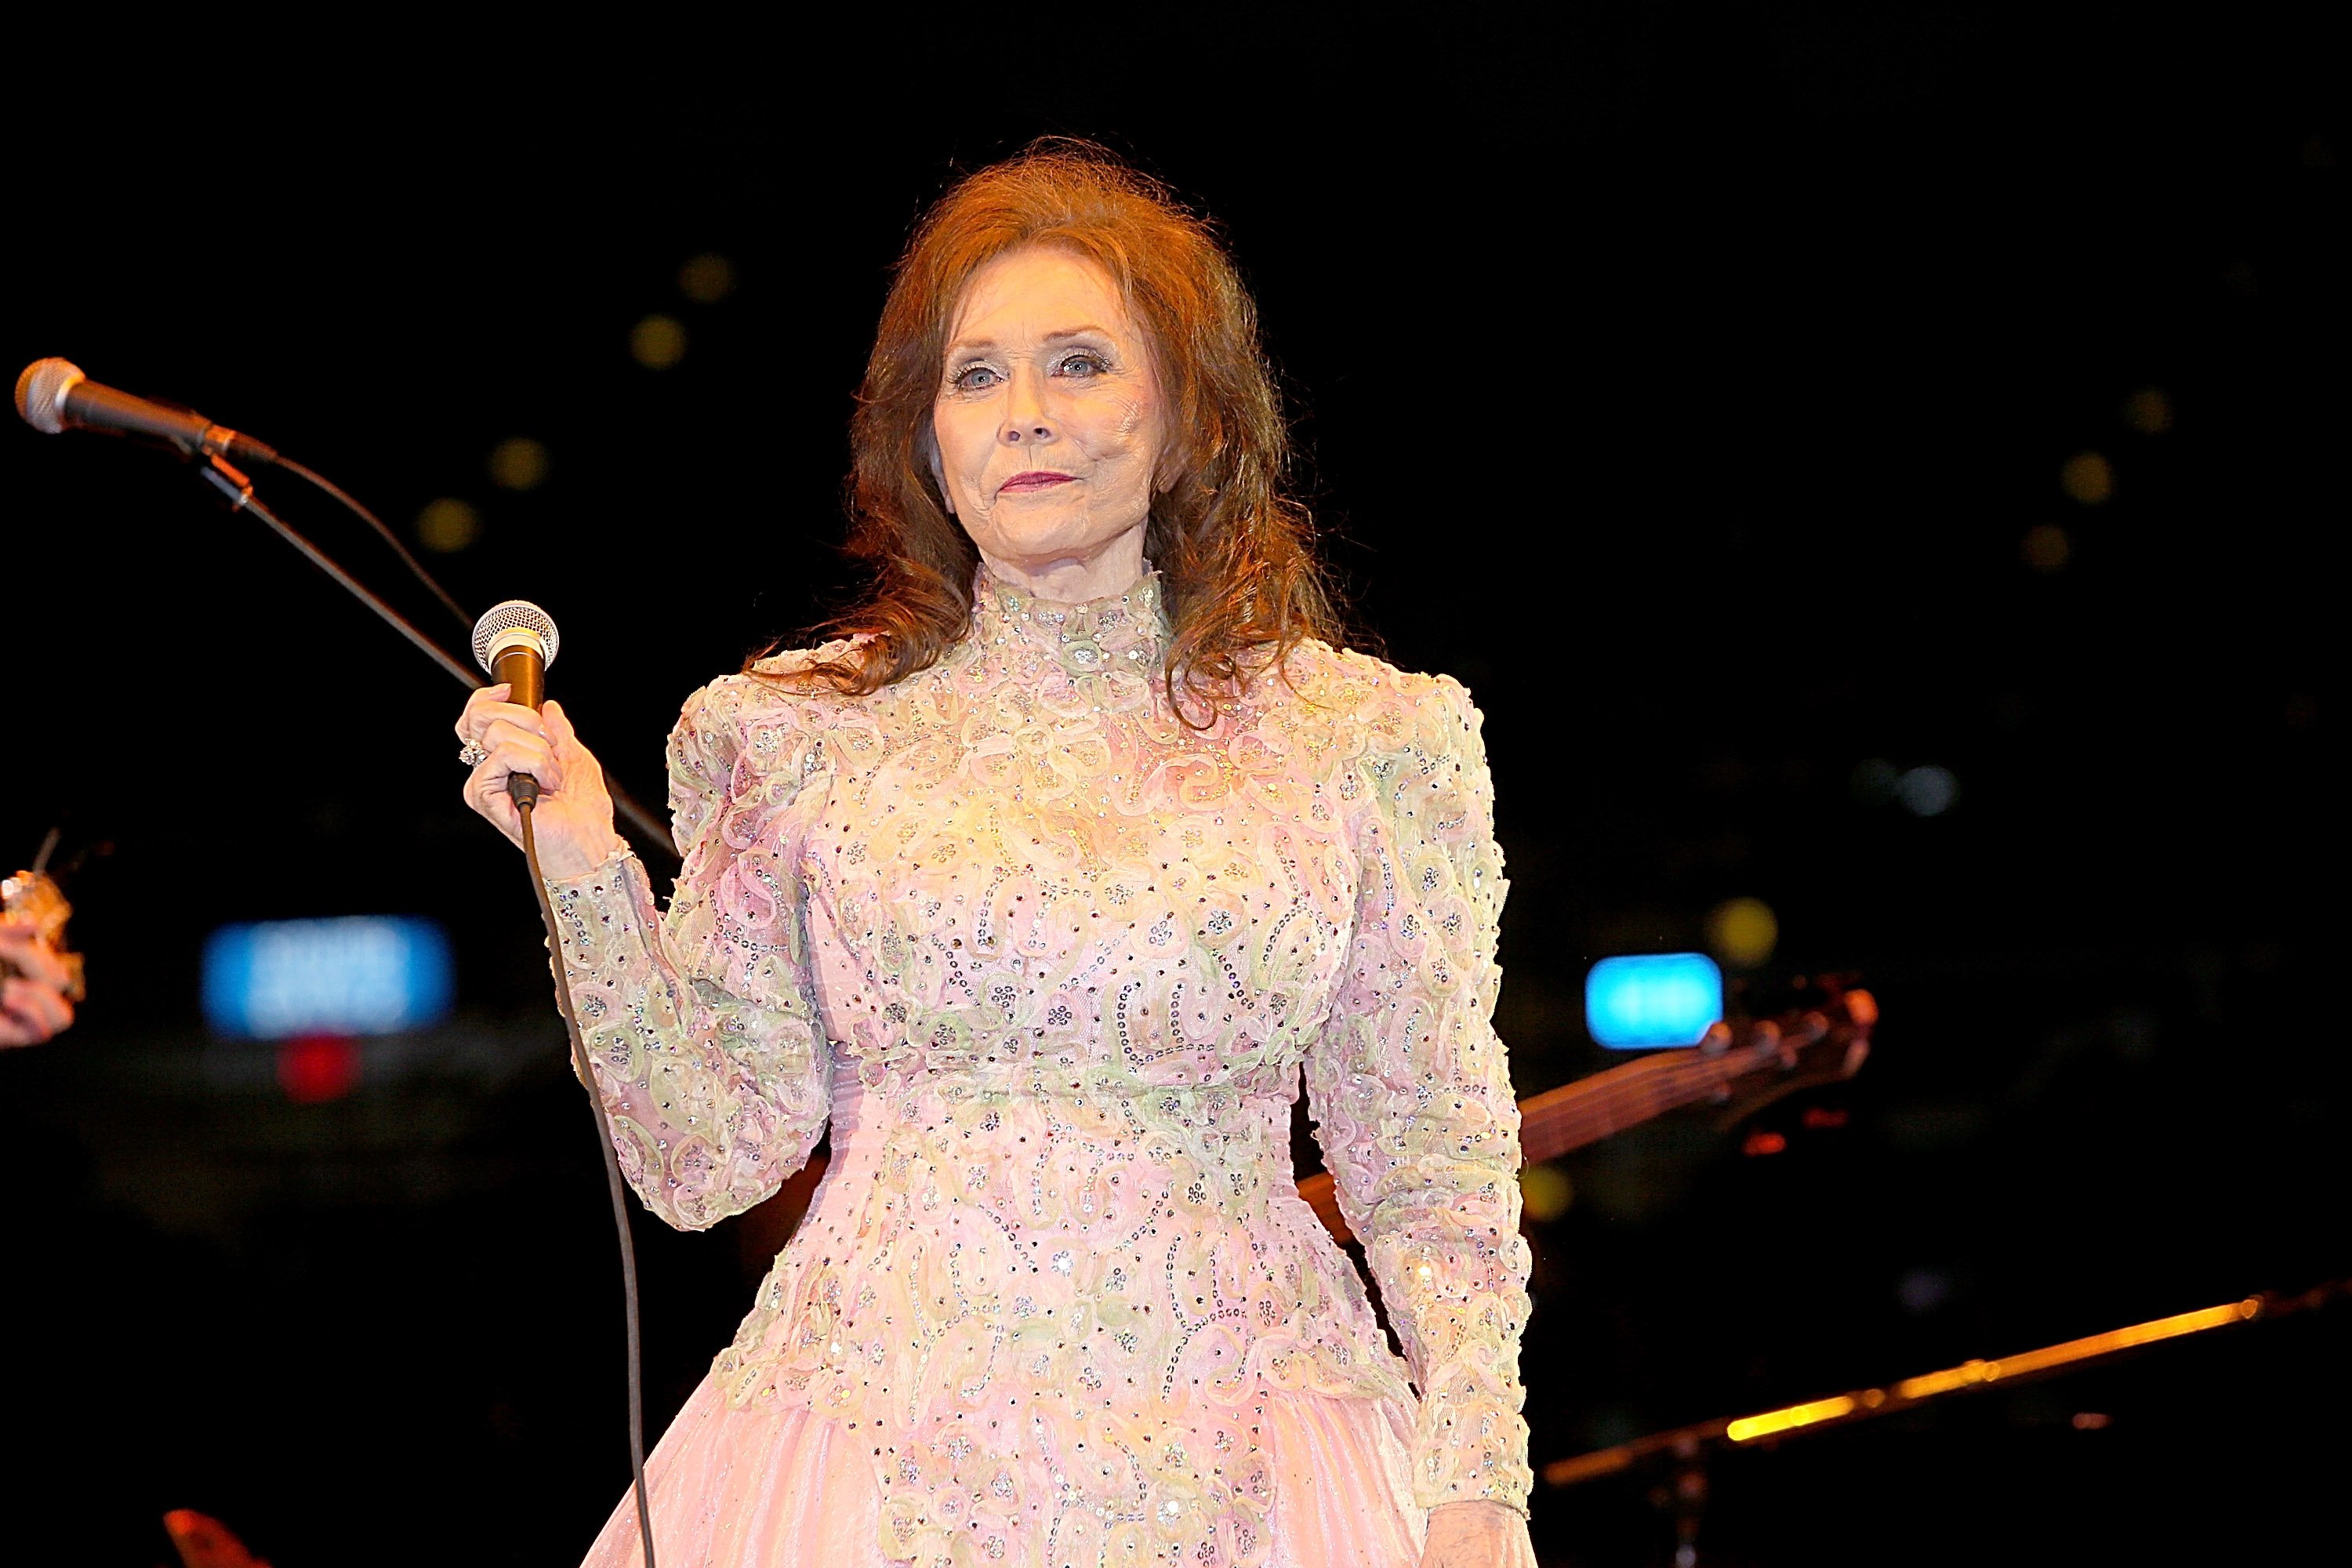 Loretta Lynn performs at the Adrian Phillips Ballroom on July 31, 2004 in Atlantic City, New Jersey.  |  Photo: Getty Images